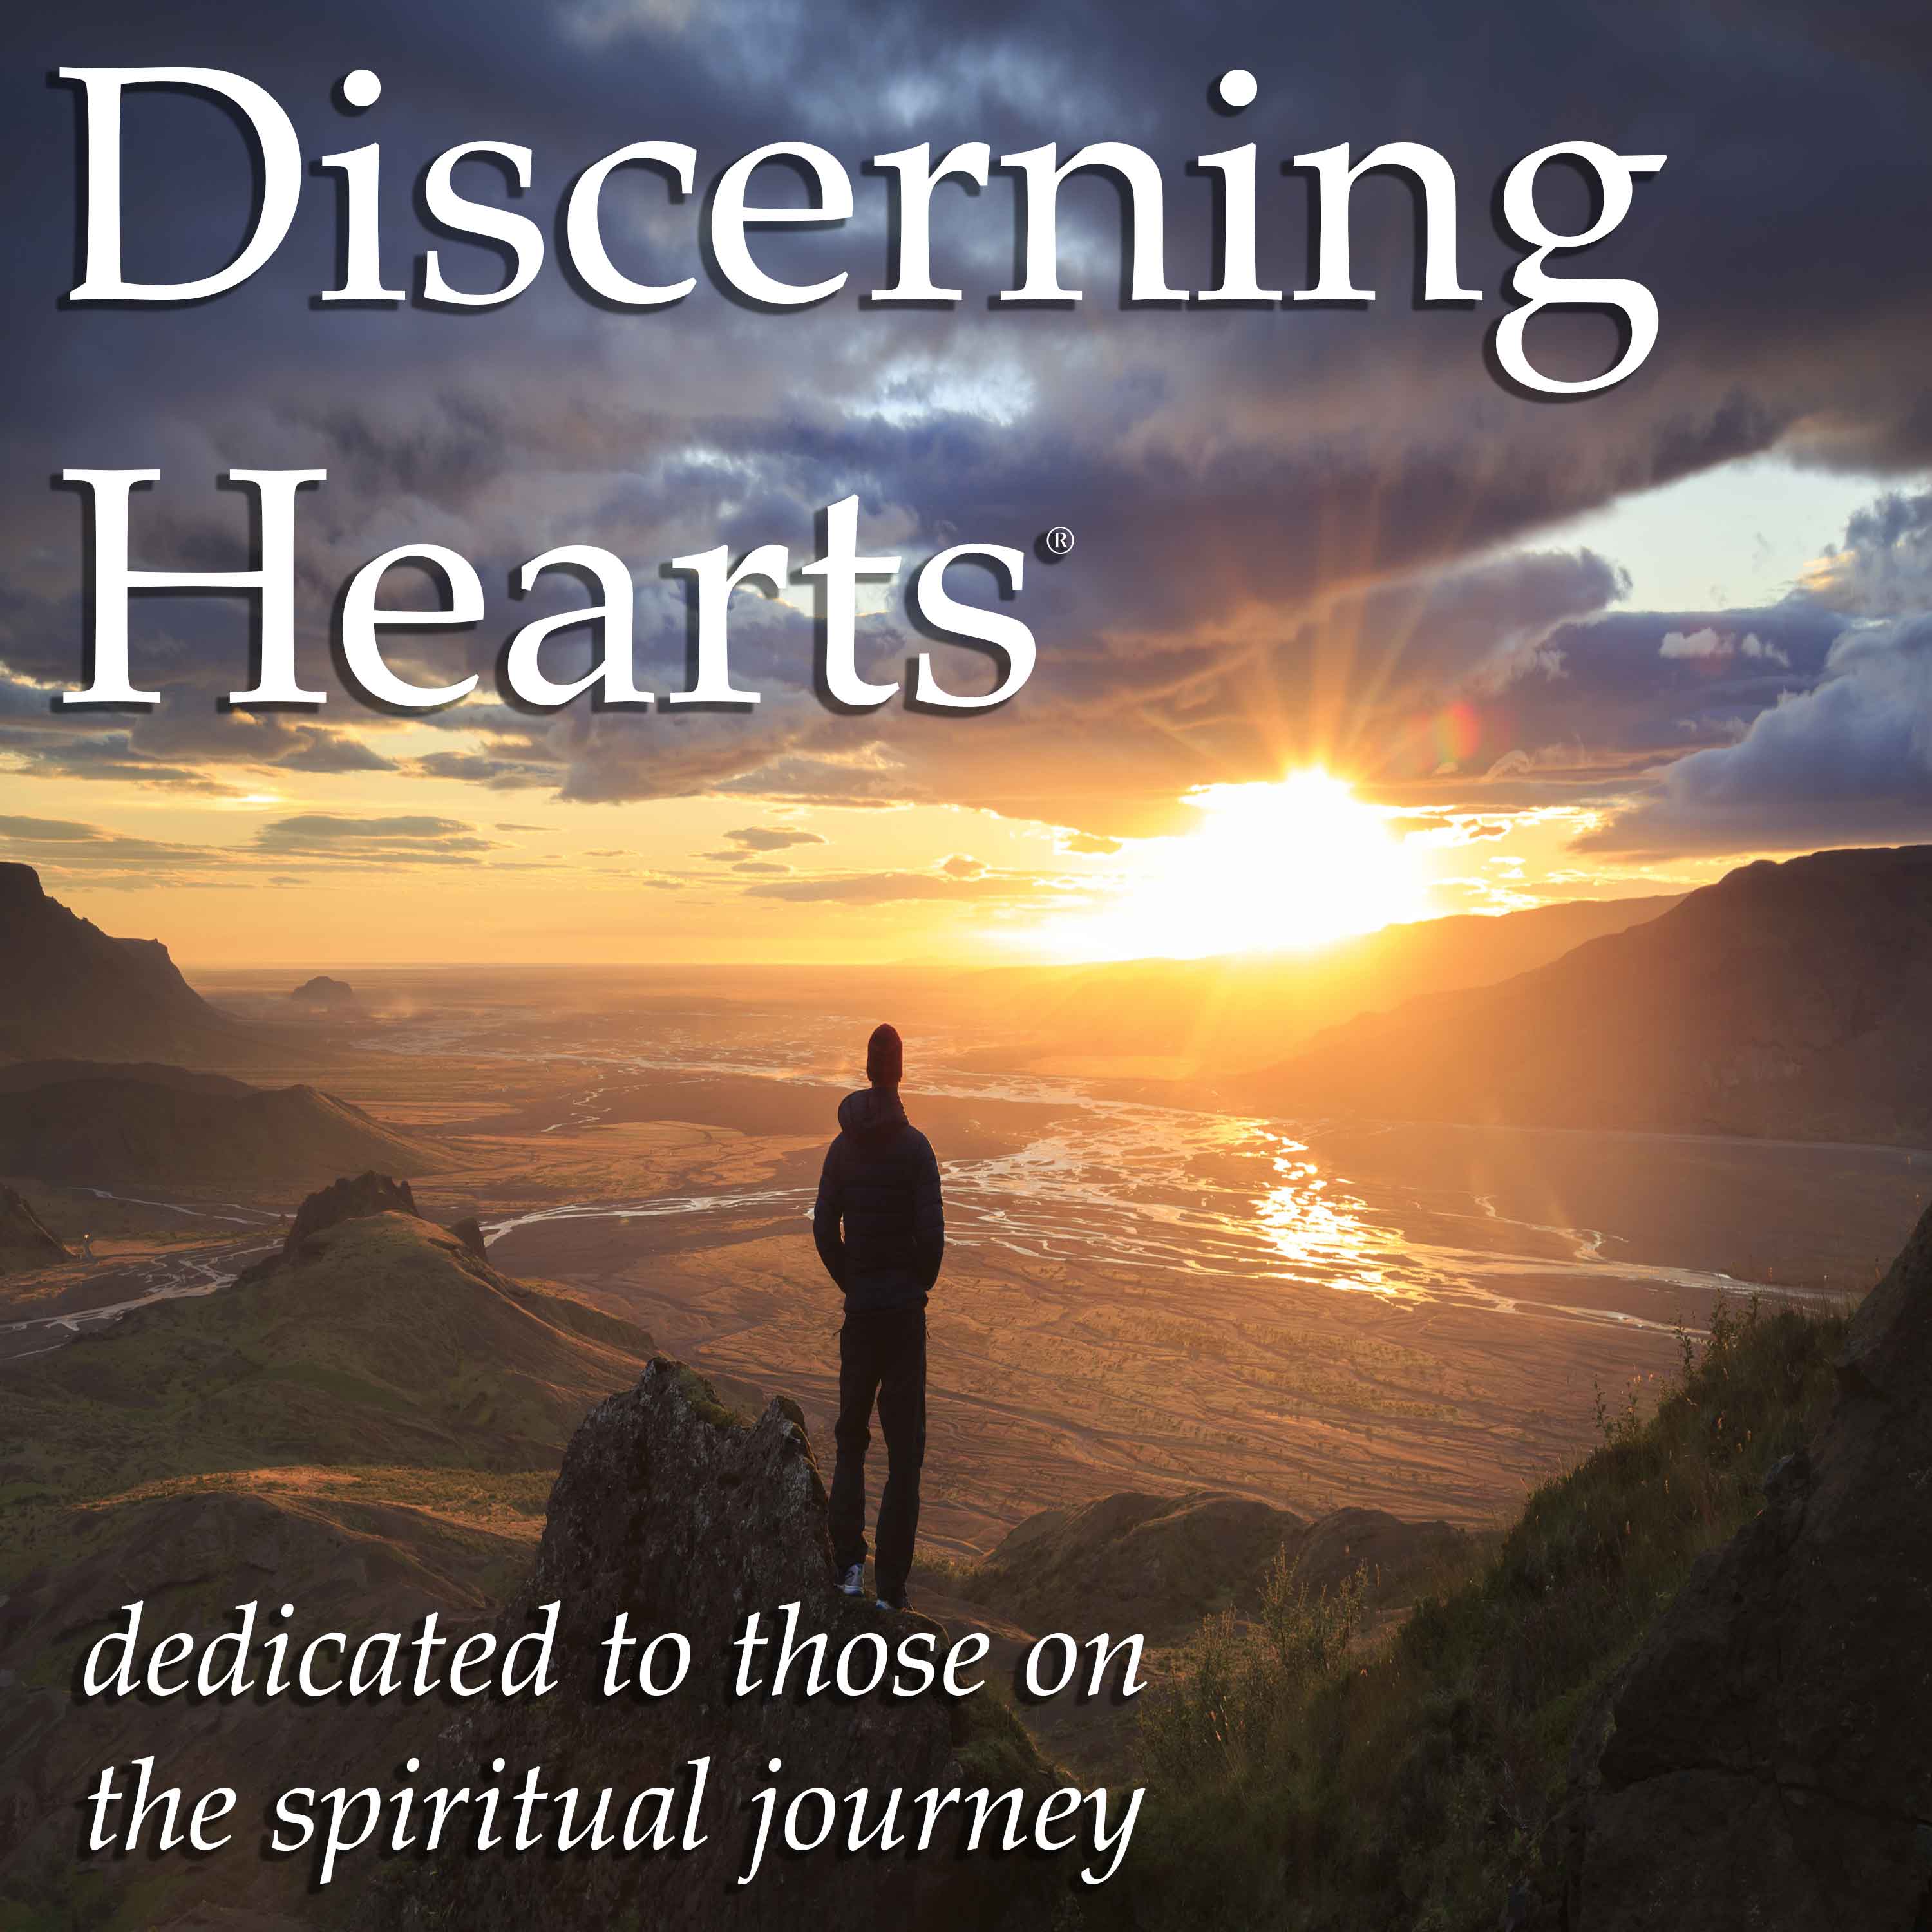 Why do those who trust in God suffer?  Building a Kingdom of Love w/ Msgr. John Esseff  Discerning Hearts Podcast - burst 3